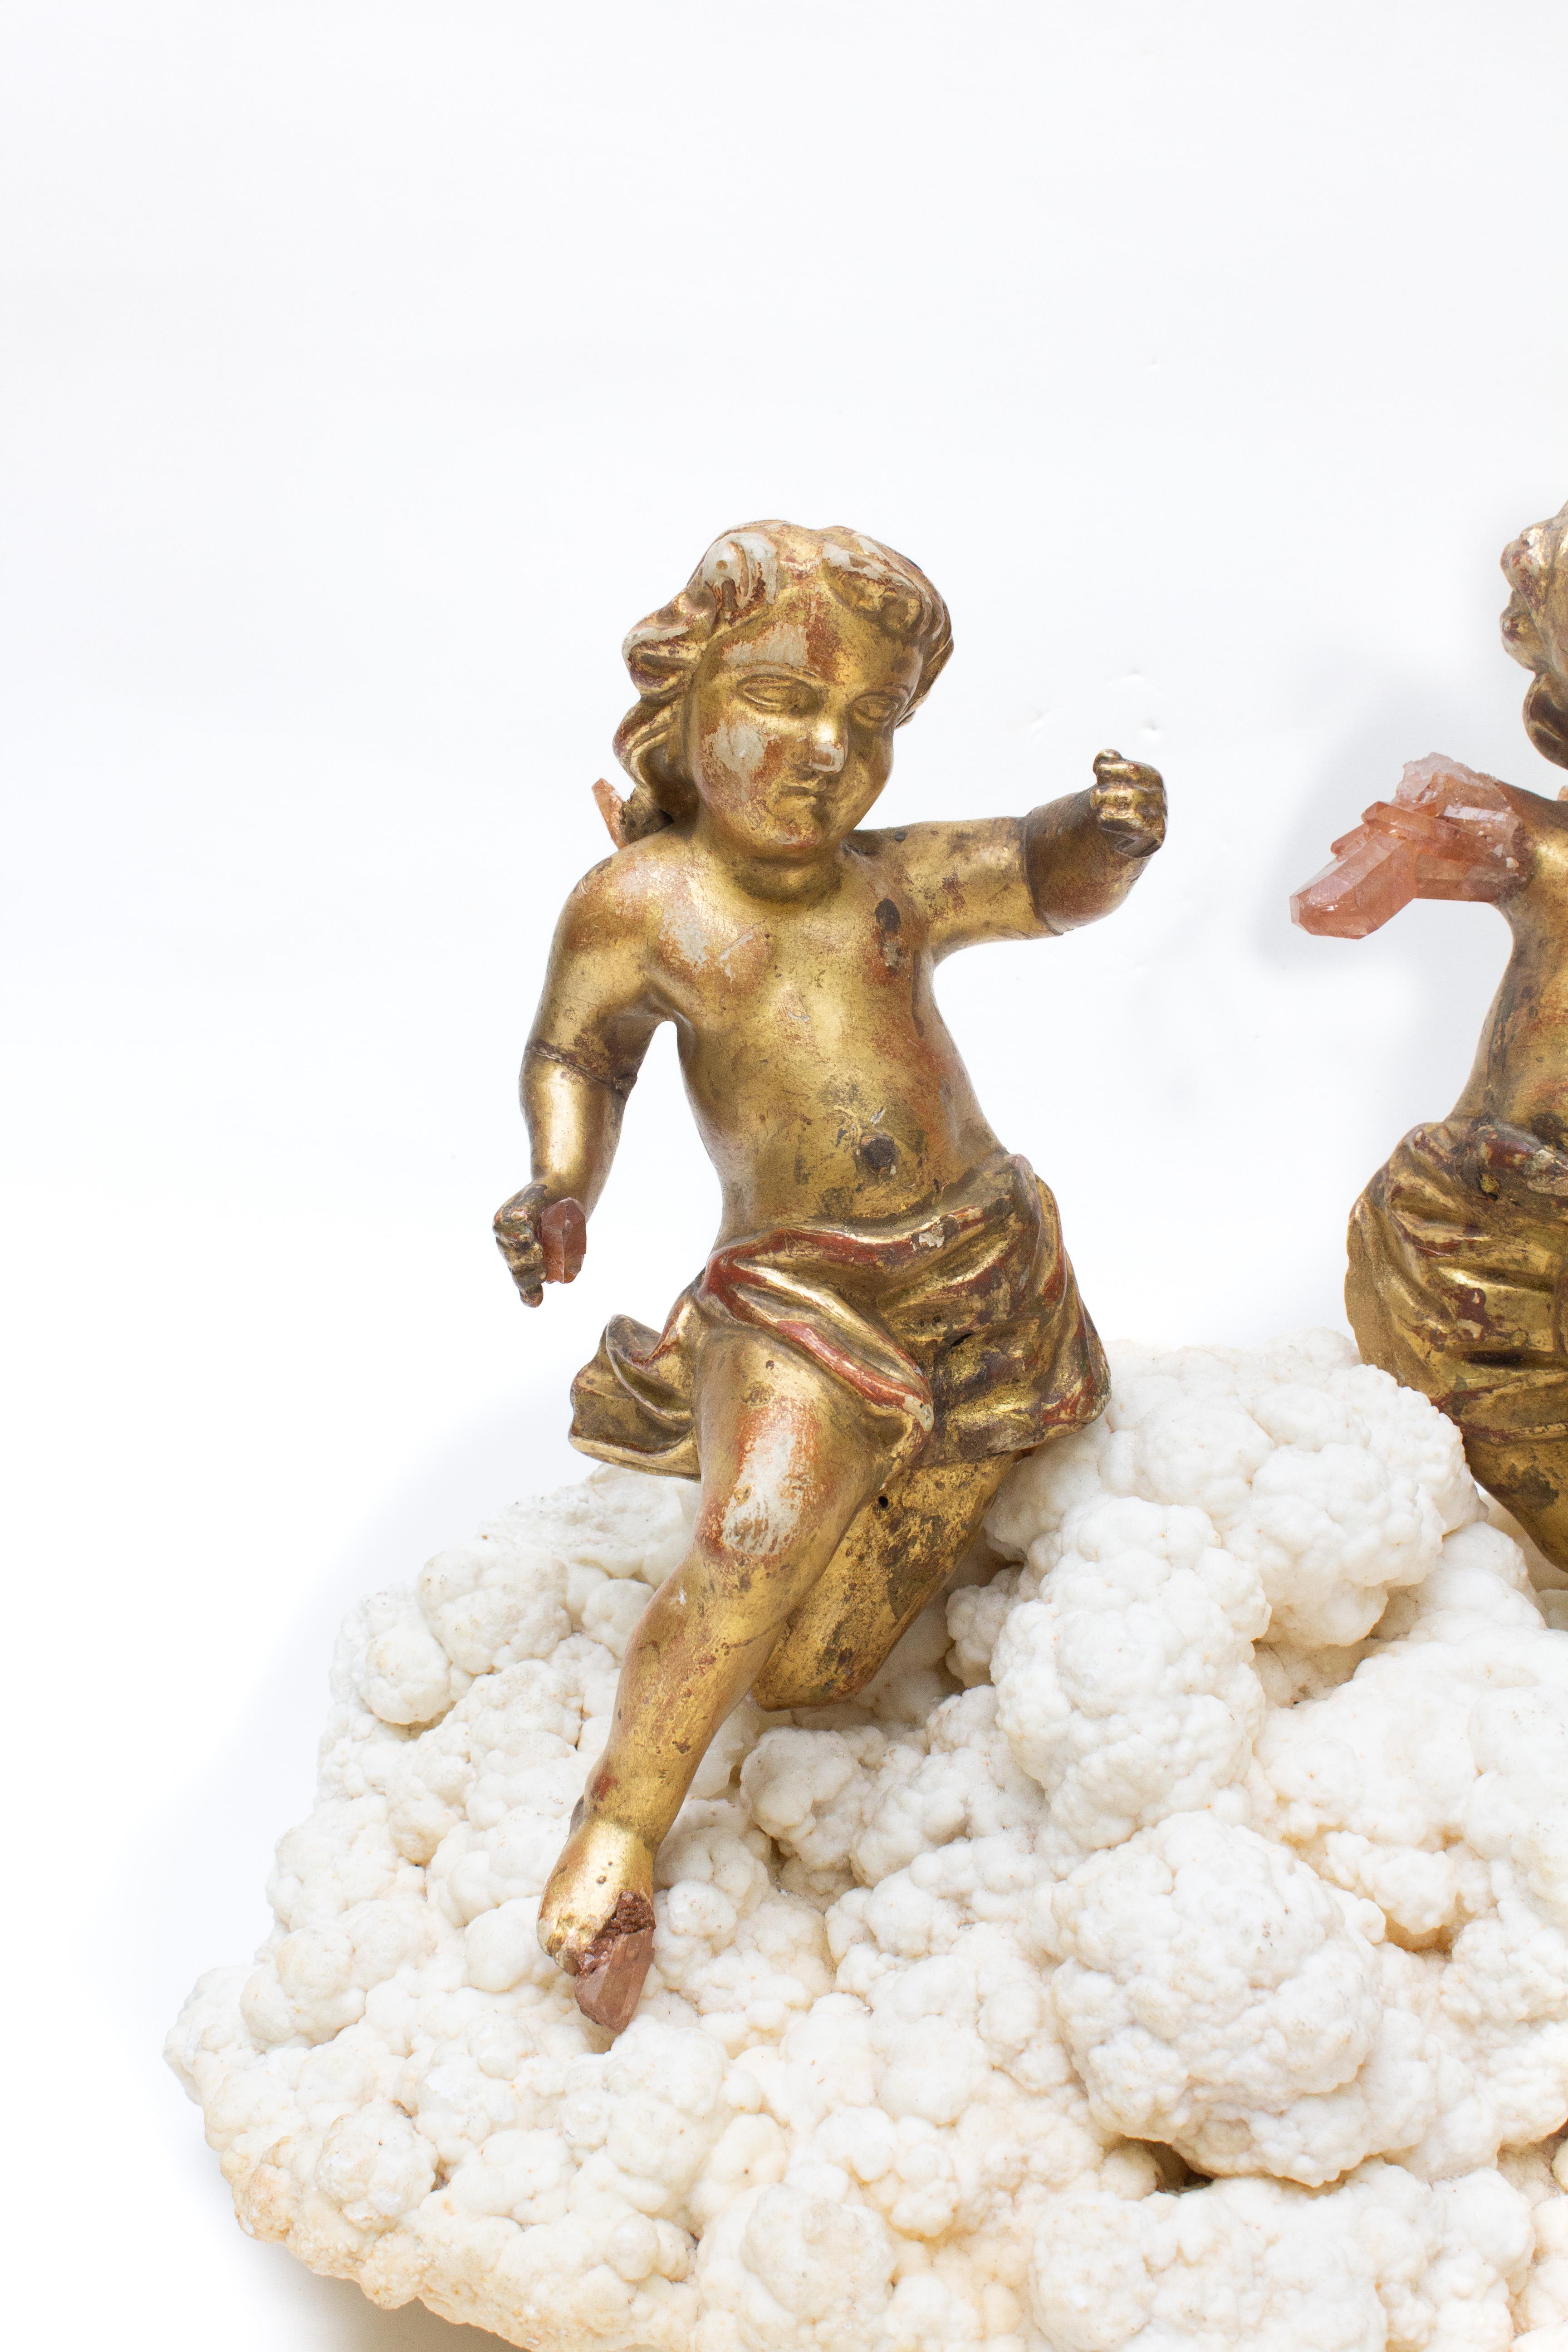 Pair of 18th century Italian hand-carved gold leaf angels with tangerine quartz crystals and mounted on aragonite. The hand-carved angels were once part of a heavenly, angelic depiction in a historic church in Tuscany. 

The angel arms and feet are